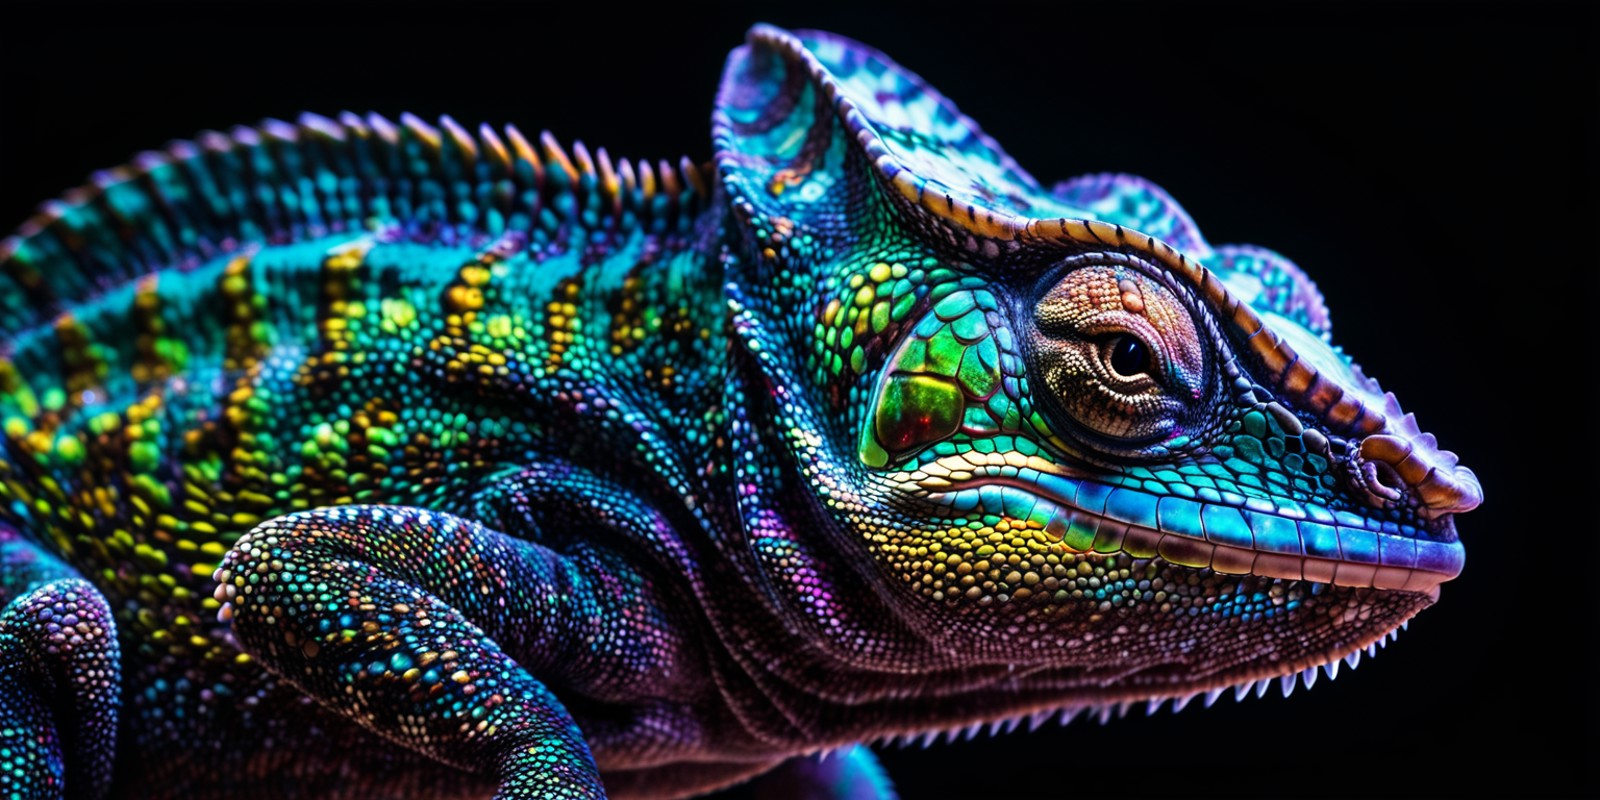 a nightly award-winning close-up photograph of a vibrant hologram chameleon in front of a black background,  vivid contras...